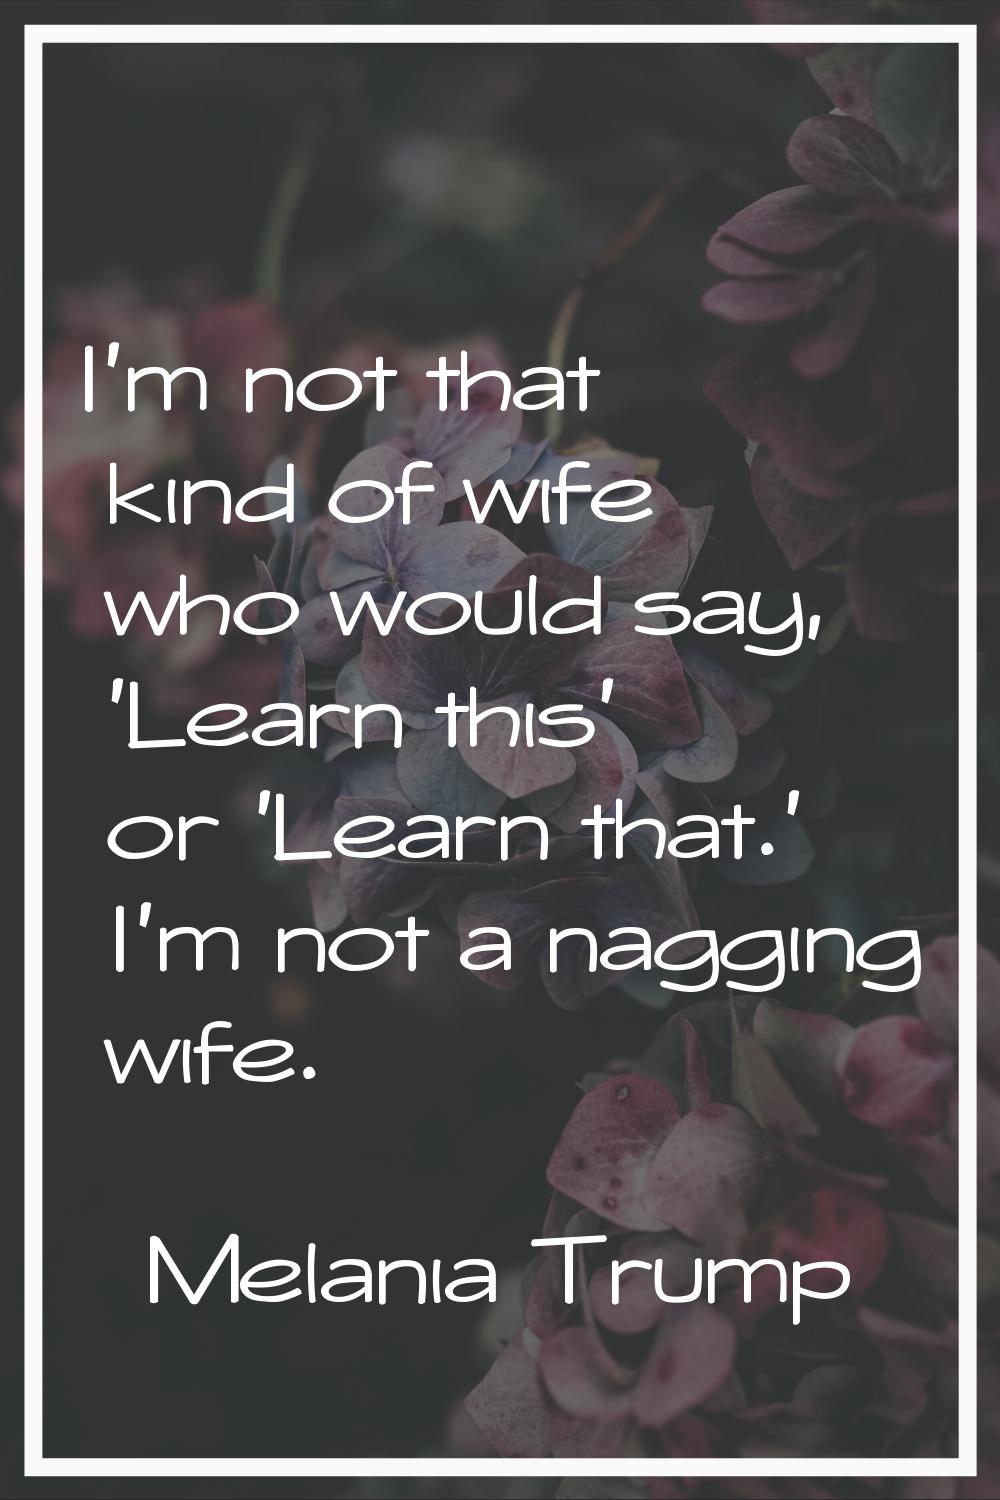 I'm not that kind of wife who would say, 'Learn this' or 'Learn that.' I'm not a nagging wife.